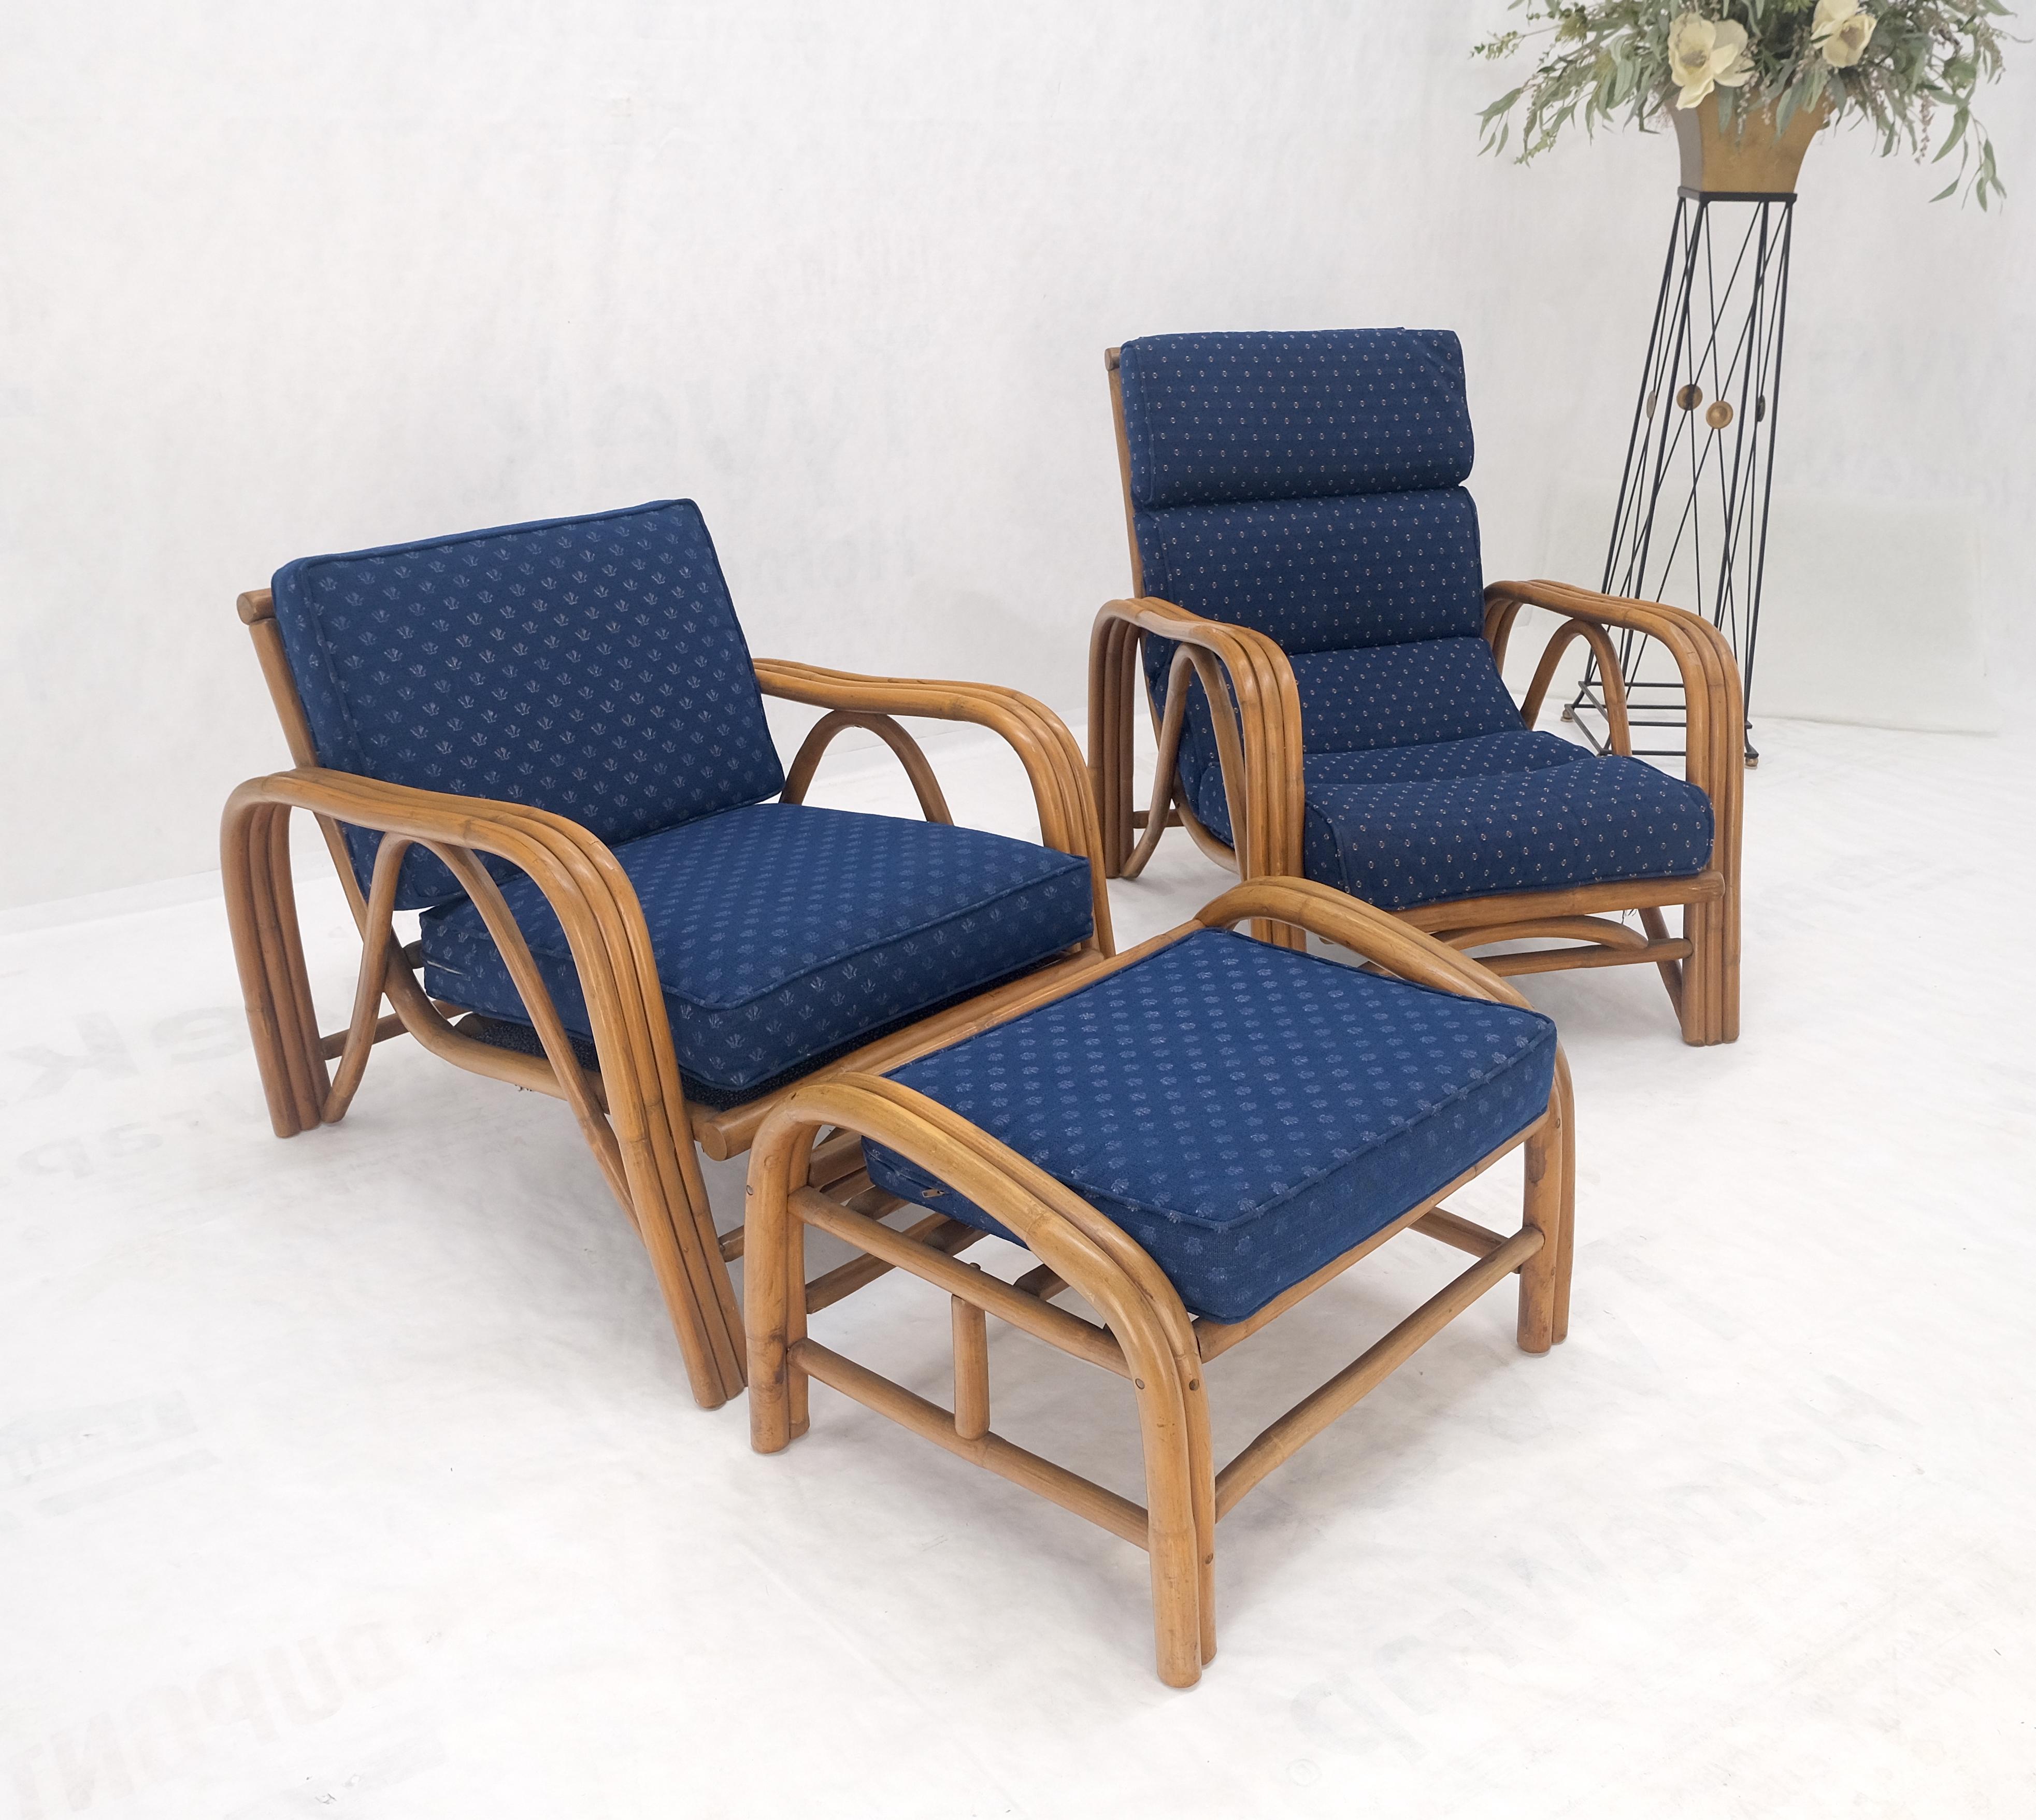 Pair of His & Hers Rattan Bamboo Mid Century Modern Lounge Chairs Ottoman MINT! im Angebot 2